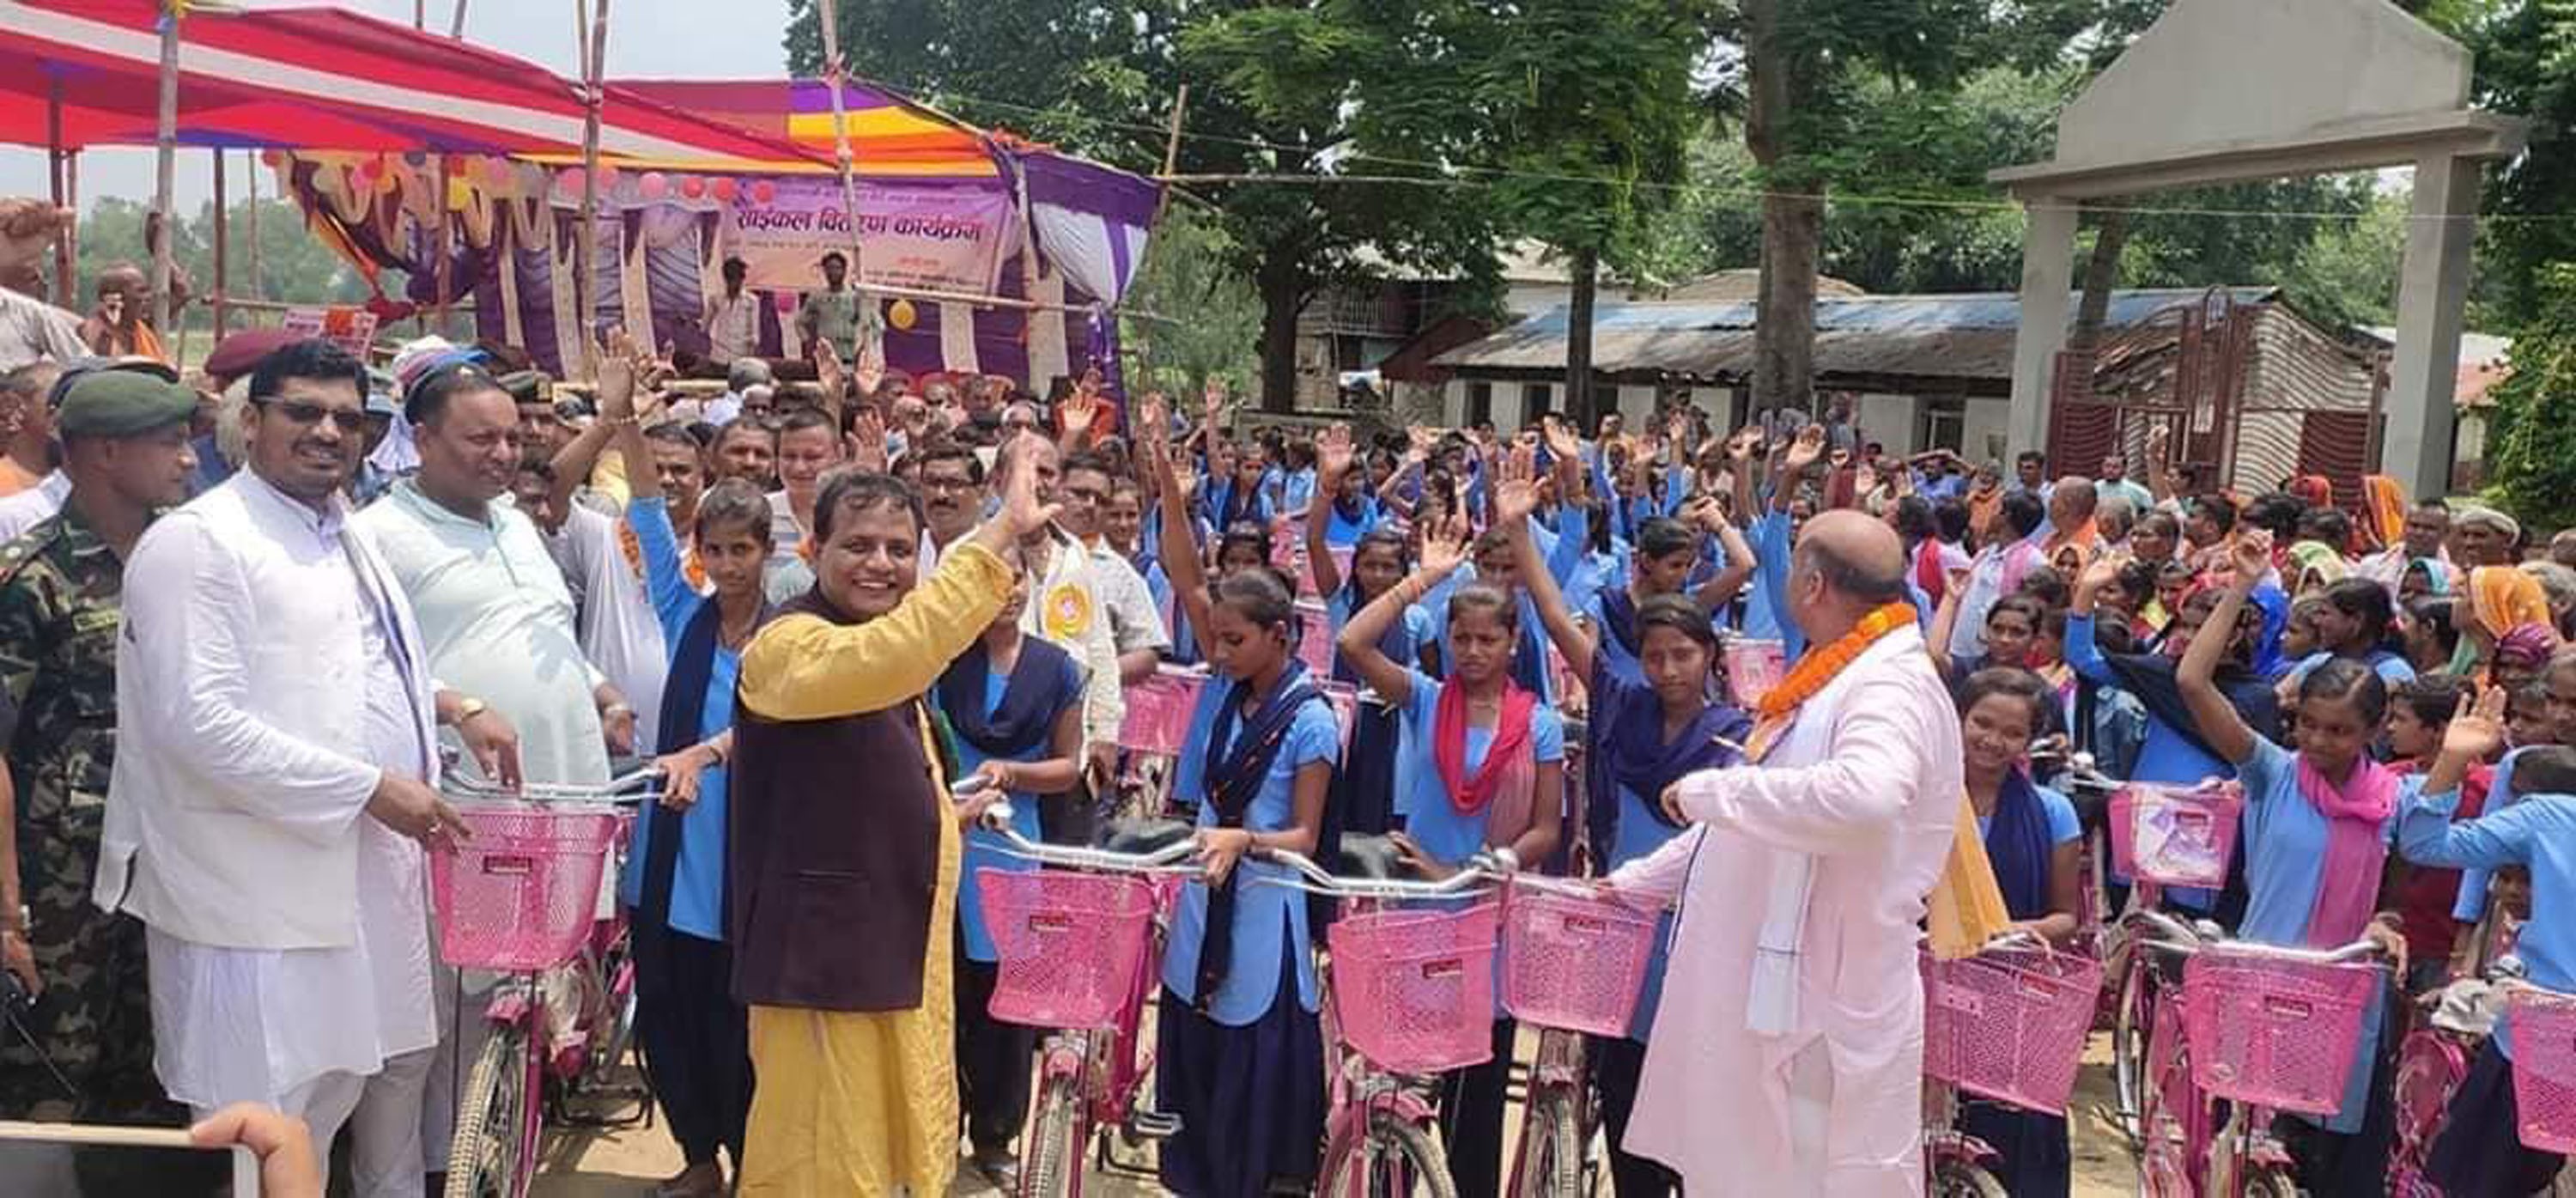 chief-minister-of-province-2-lalbabu-raut-front-yellow-dress-distributes-cycles-to-some-274-girl-students-of-secondary-schools-in-mahottari-district-aug-21